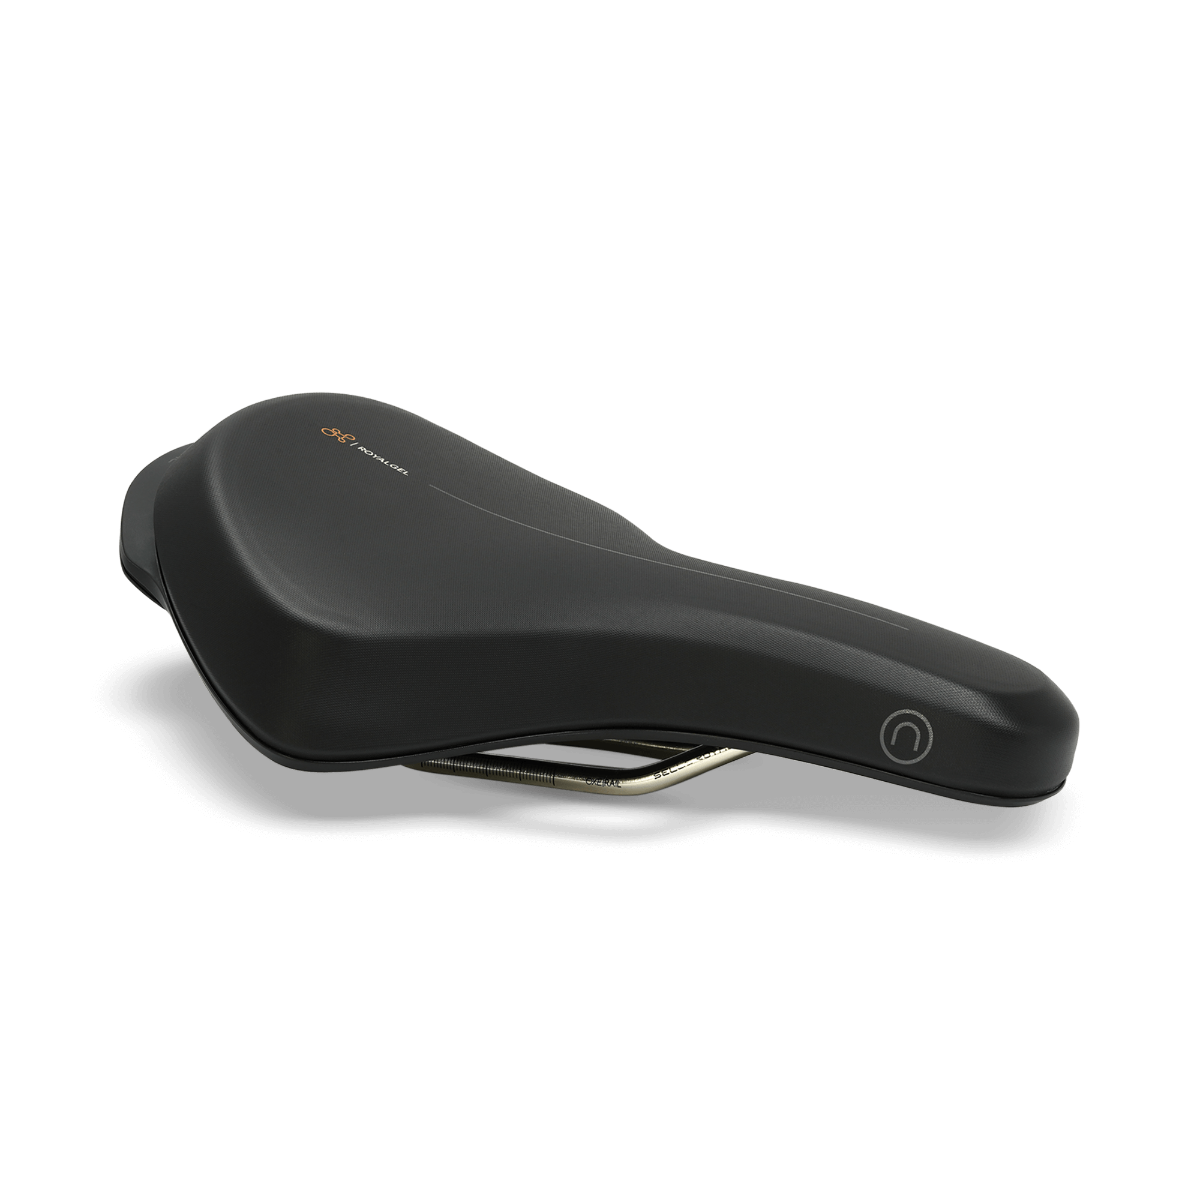 On Moderate - Selle Royal